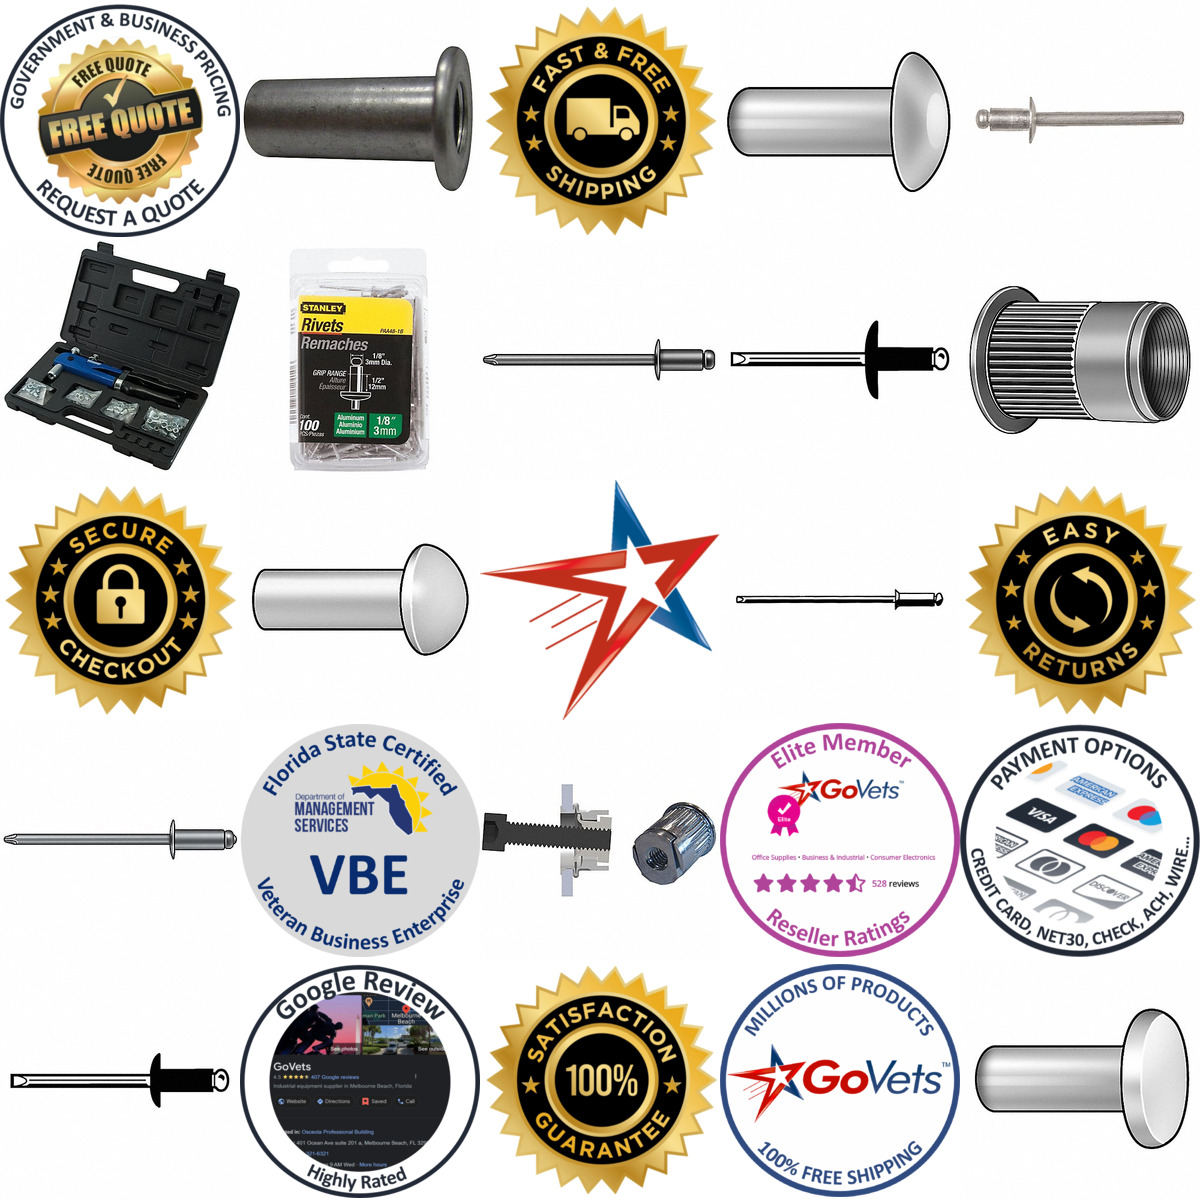 A selection of Rivets products on GoVets